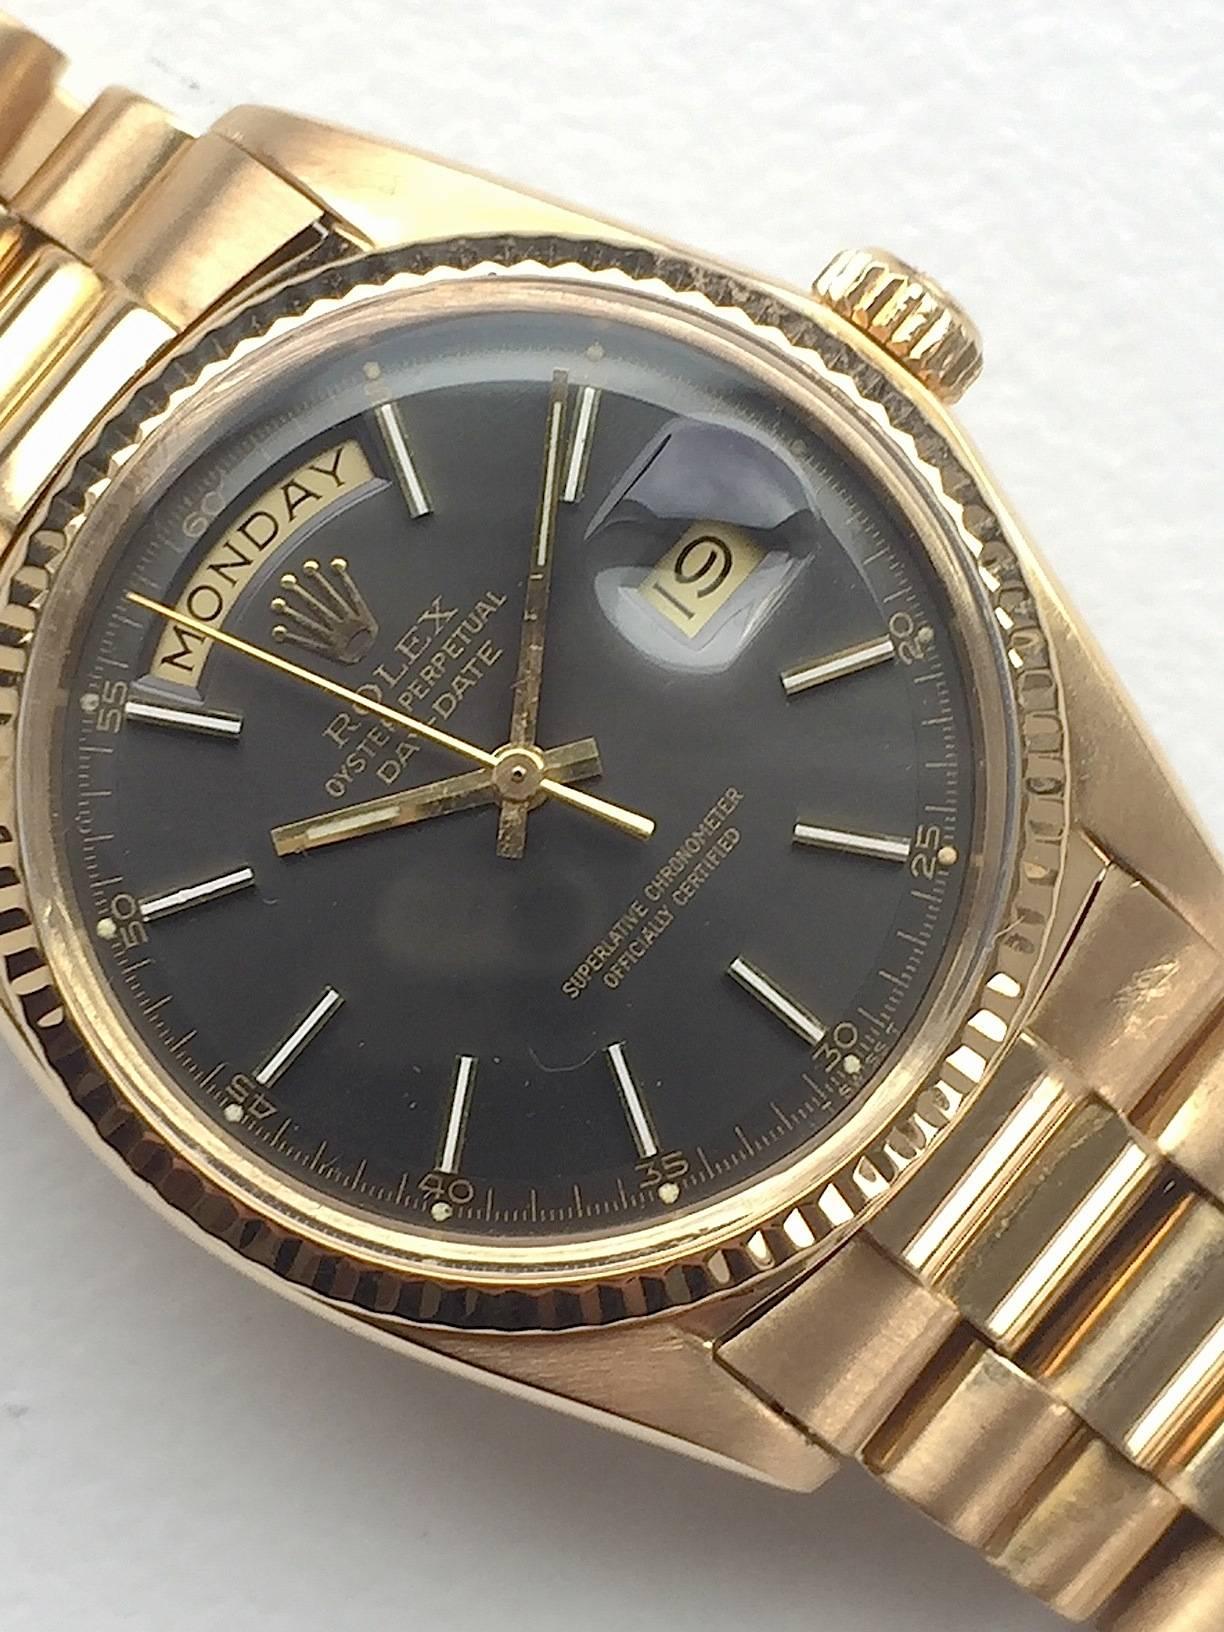 Rolex 18K Yellow Gold Day-Date Presidential Watch from the Early 1970's
Beautiful Factory Tungsten Grey Minute Track Dial with Applied Yellow Hour Markers 
Yellow Gold Gold Fluted Bezel
18K Yellow Gold Case
36mm in size 
Features Rolex Automatic